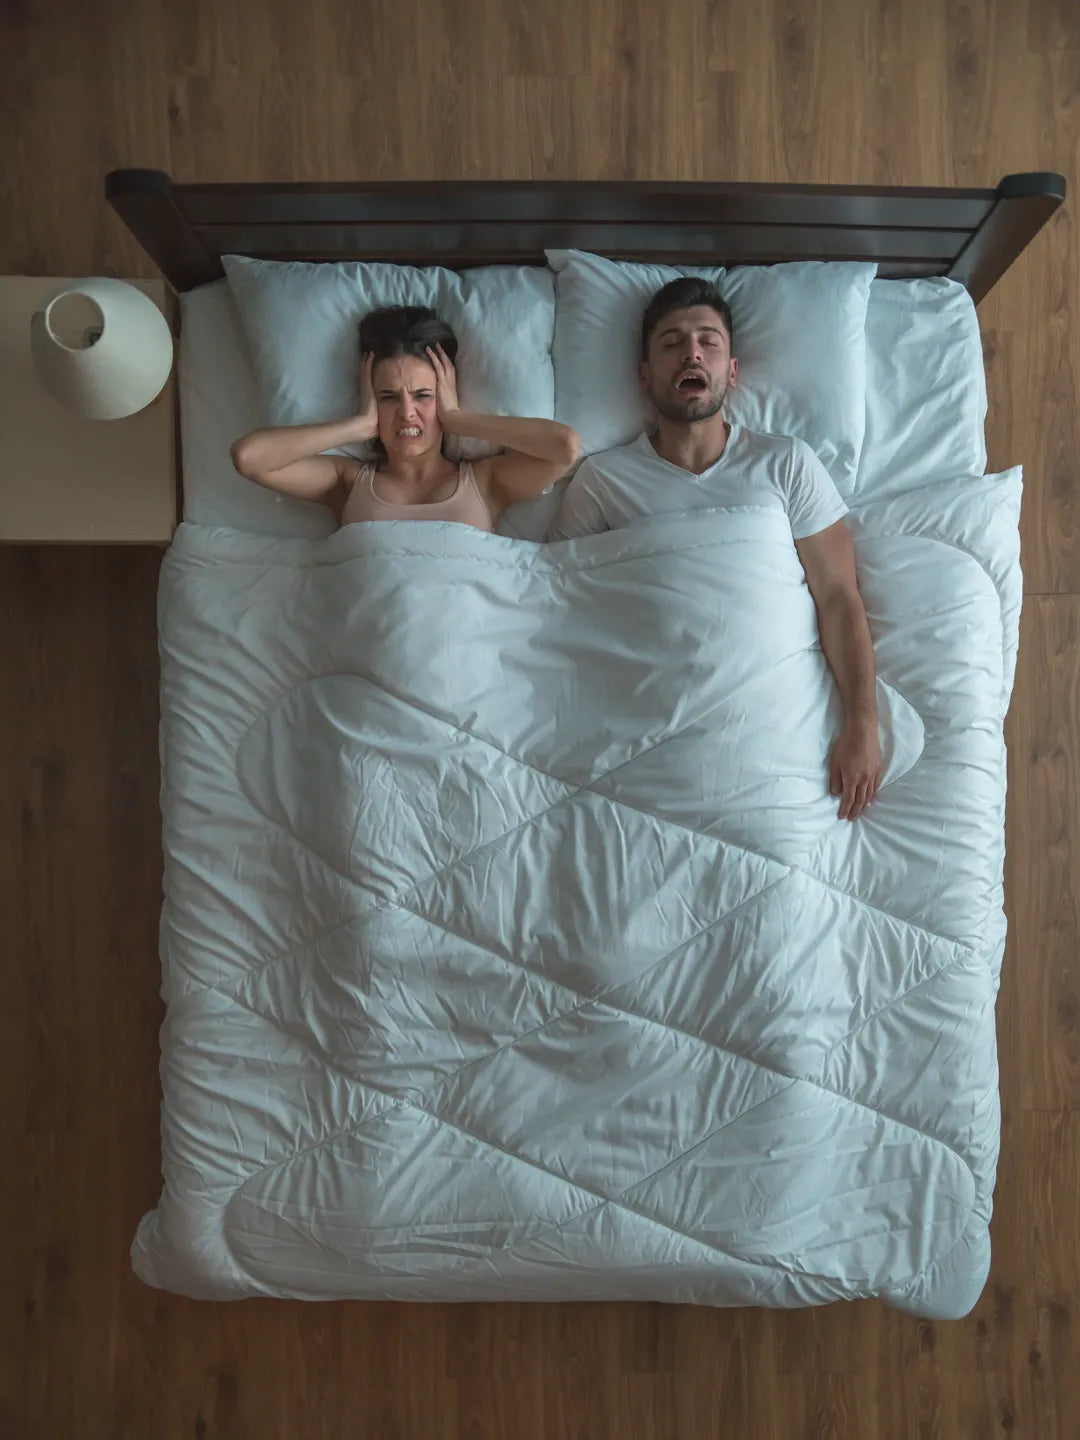 Man with sleep apnea, snore near woman on bed in humid temperature room.